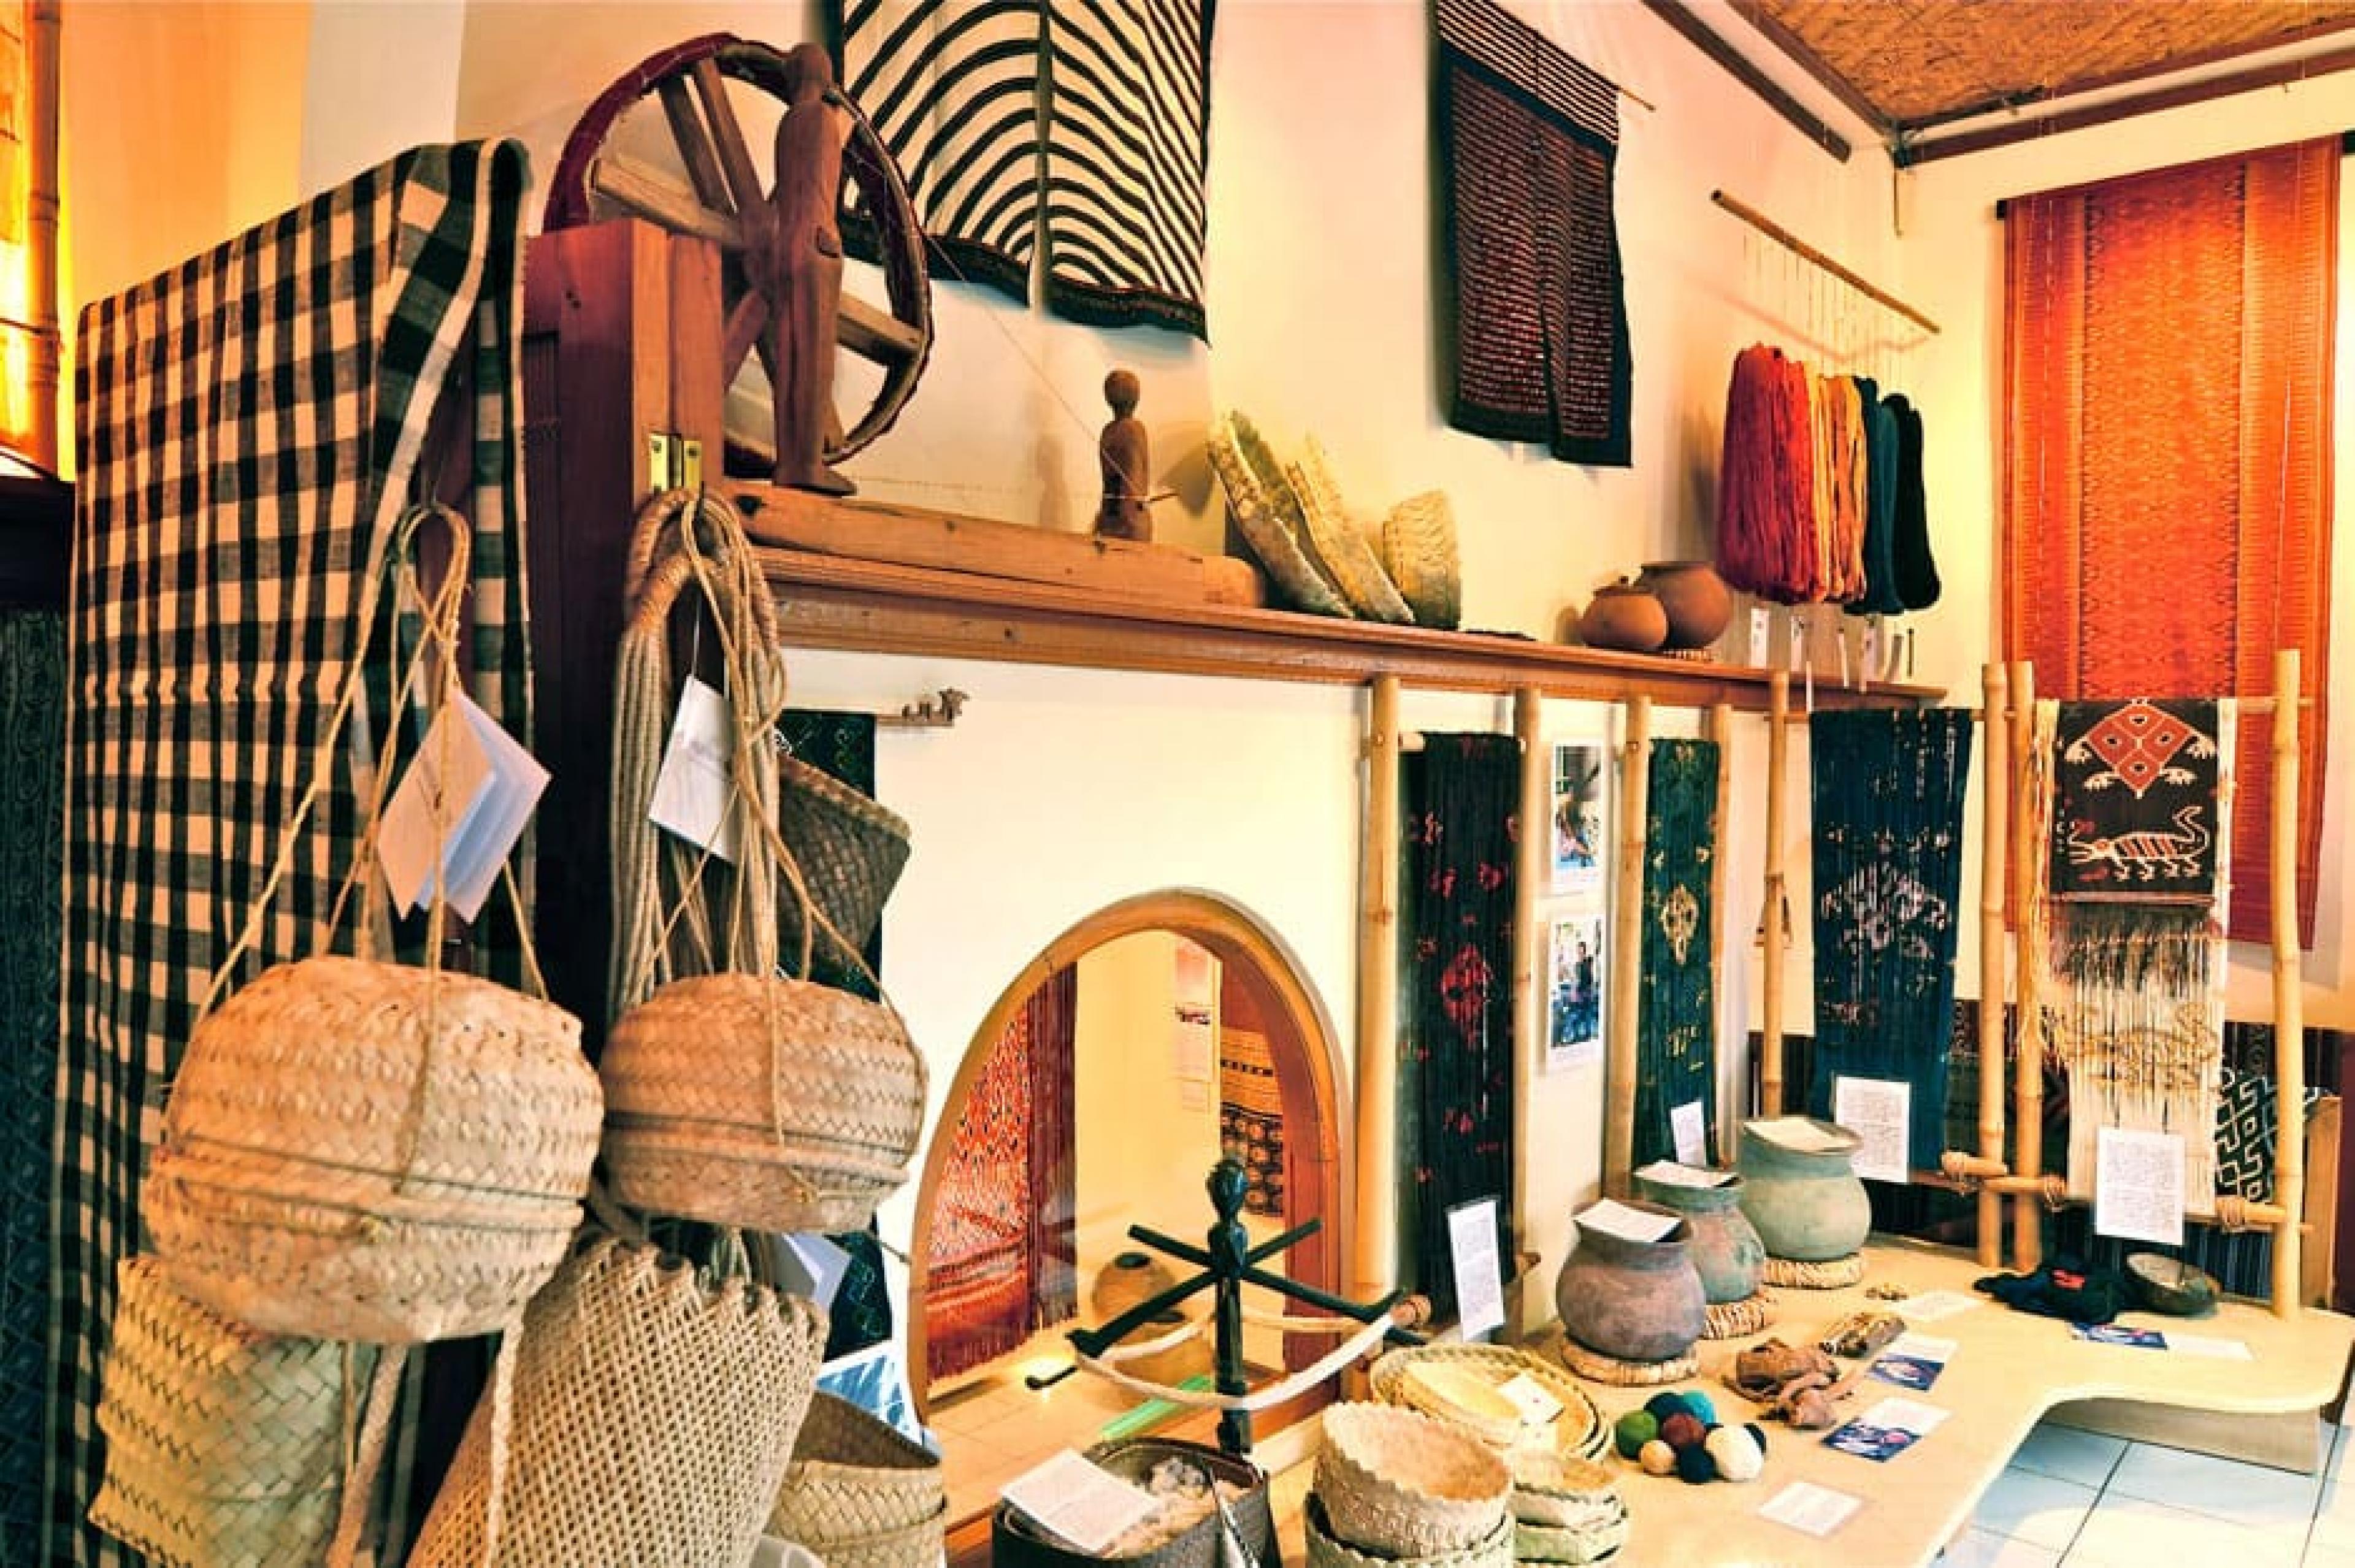 Interior at Threads of Life, Bali, Indonesia